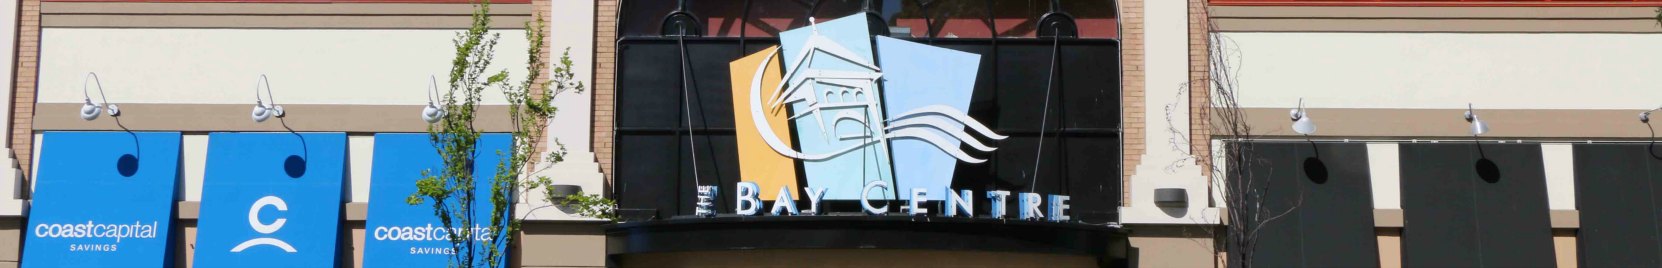 Our web header photo for the Bay Centre, showing the Bay Centre sign on Douglas Street